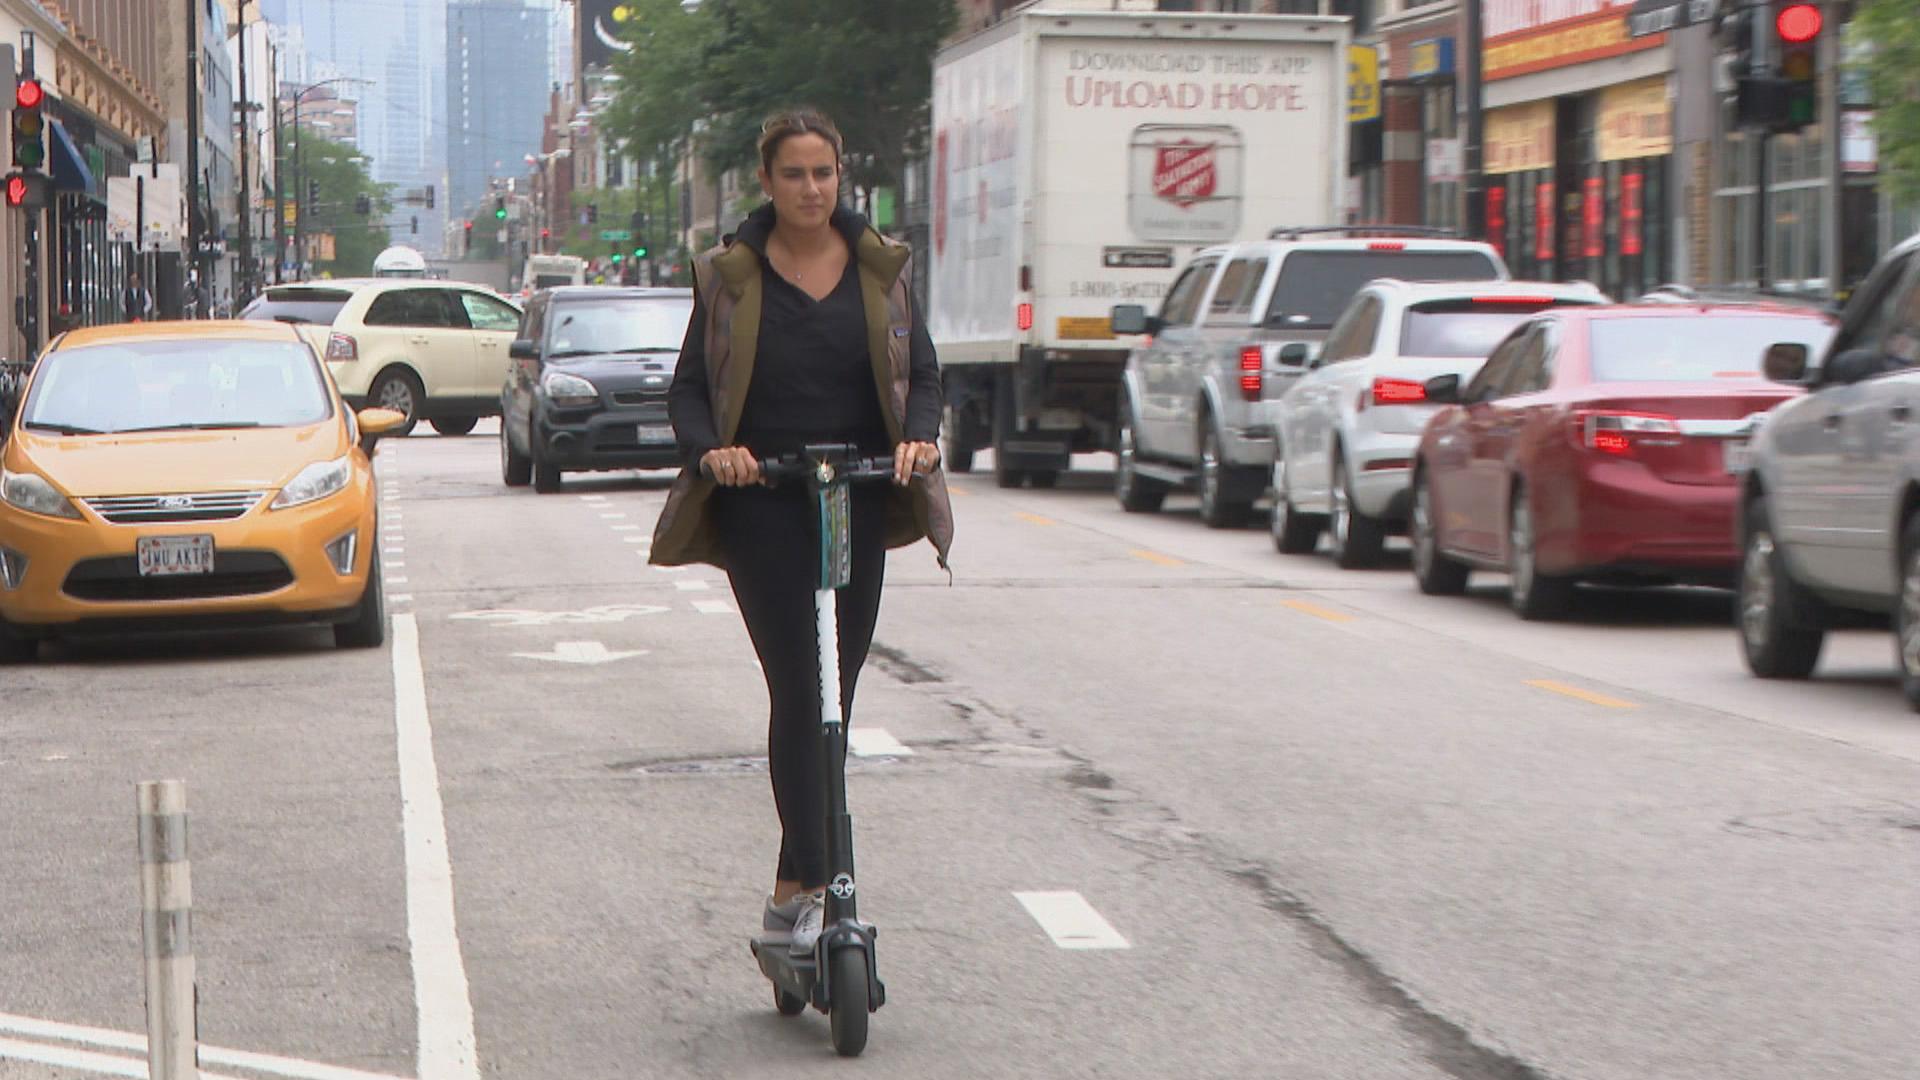 A woman rides a scooter in Chicago during the city’s first pilot program in 2019. (WTTW News)